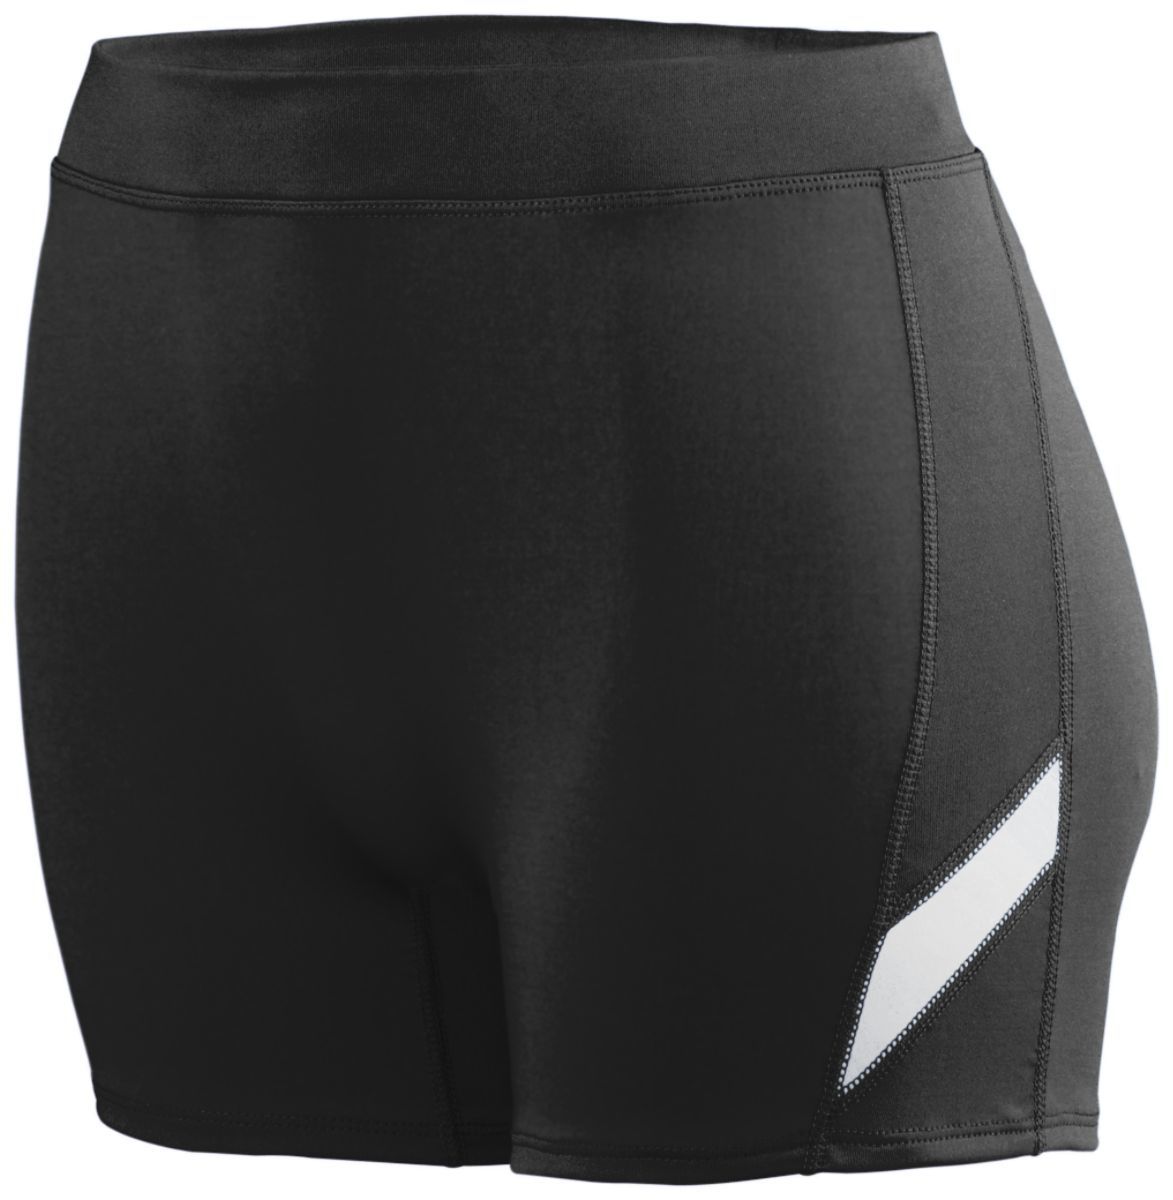 Augusta Sportswear Girls Stride Shorts in Black/White  -Part of the Girls, Augusta-Products, Volleyball, Girls-Shorts product lines at KanaleyCreations.com